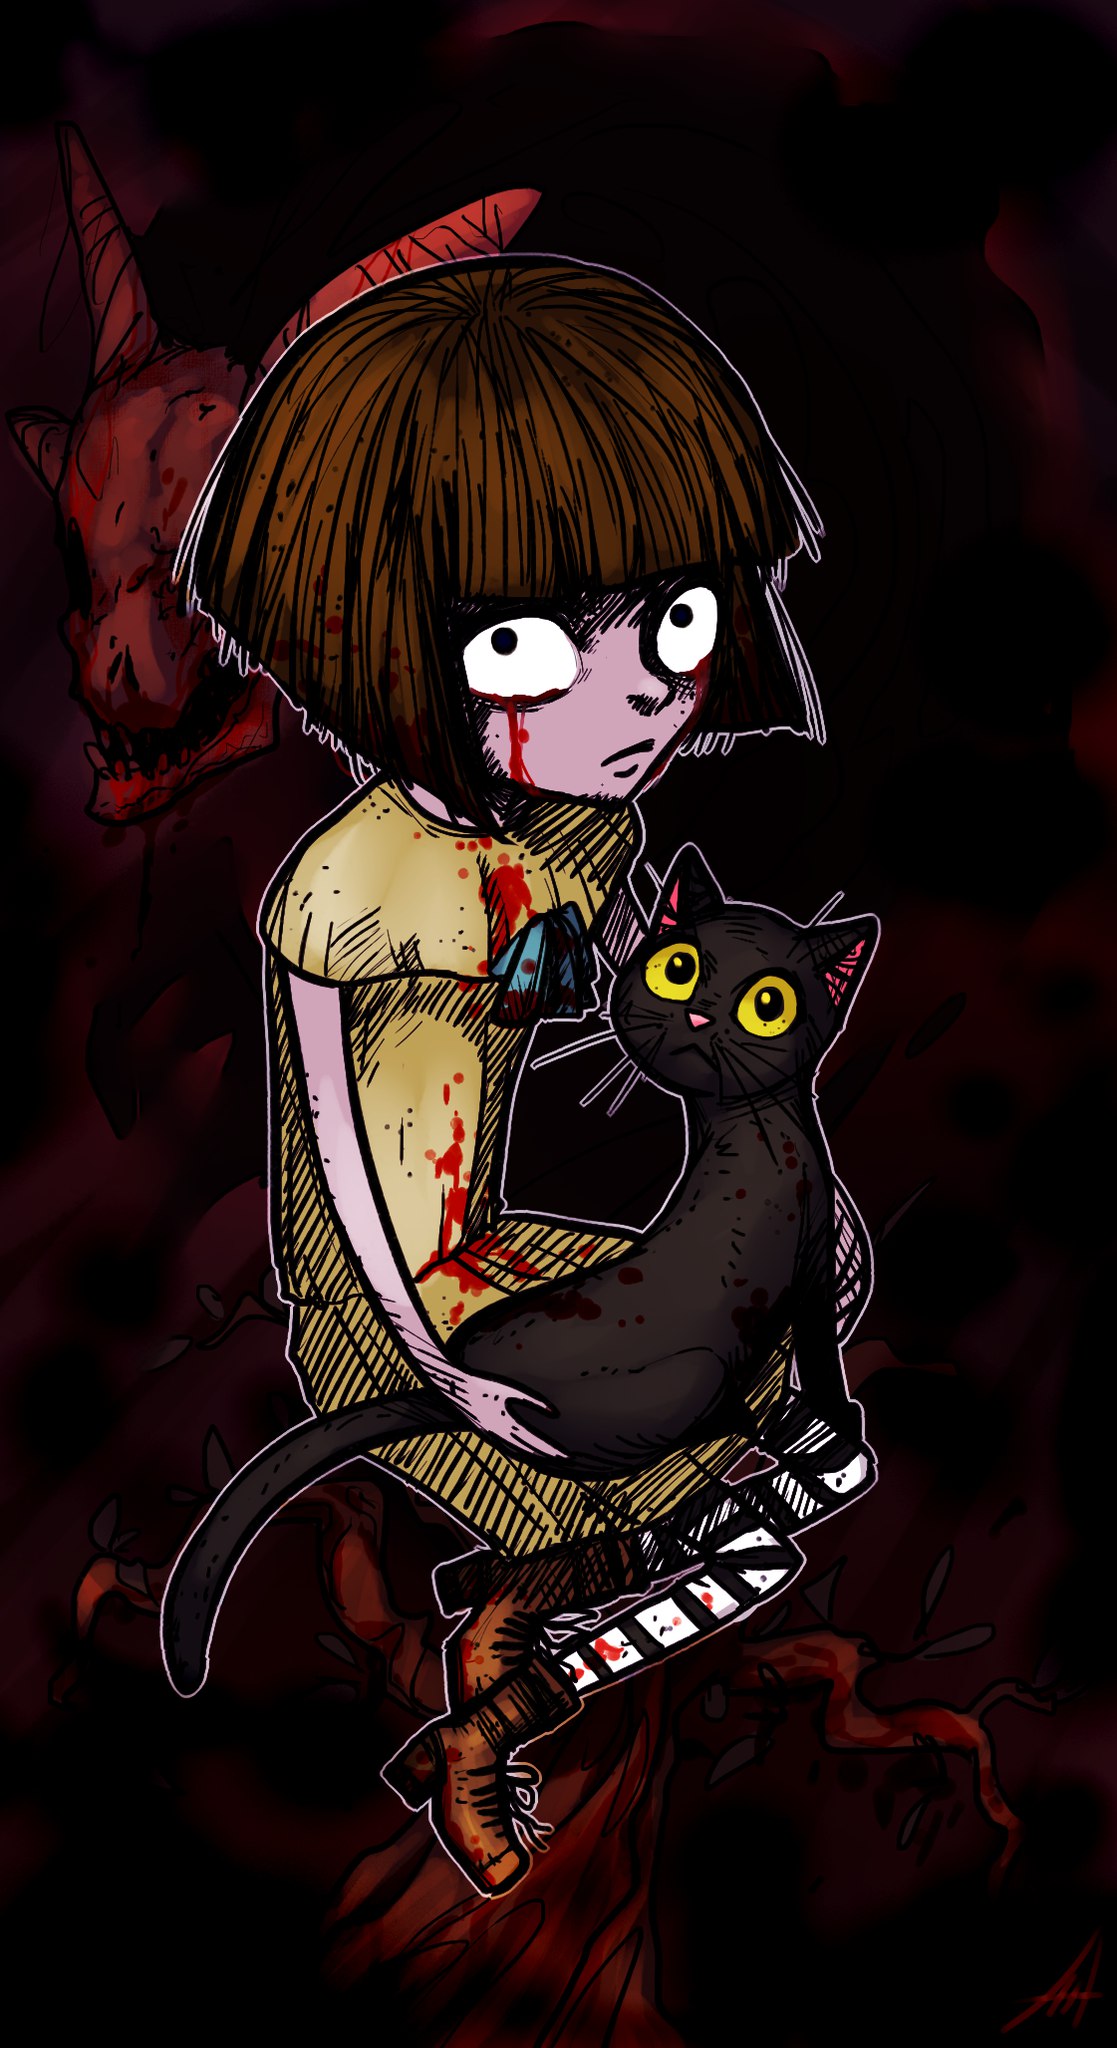 Fran Bow Background